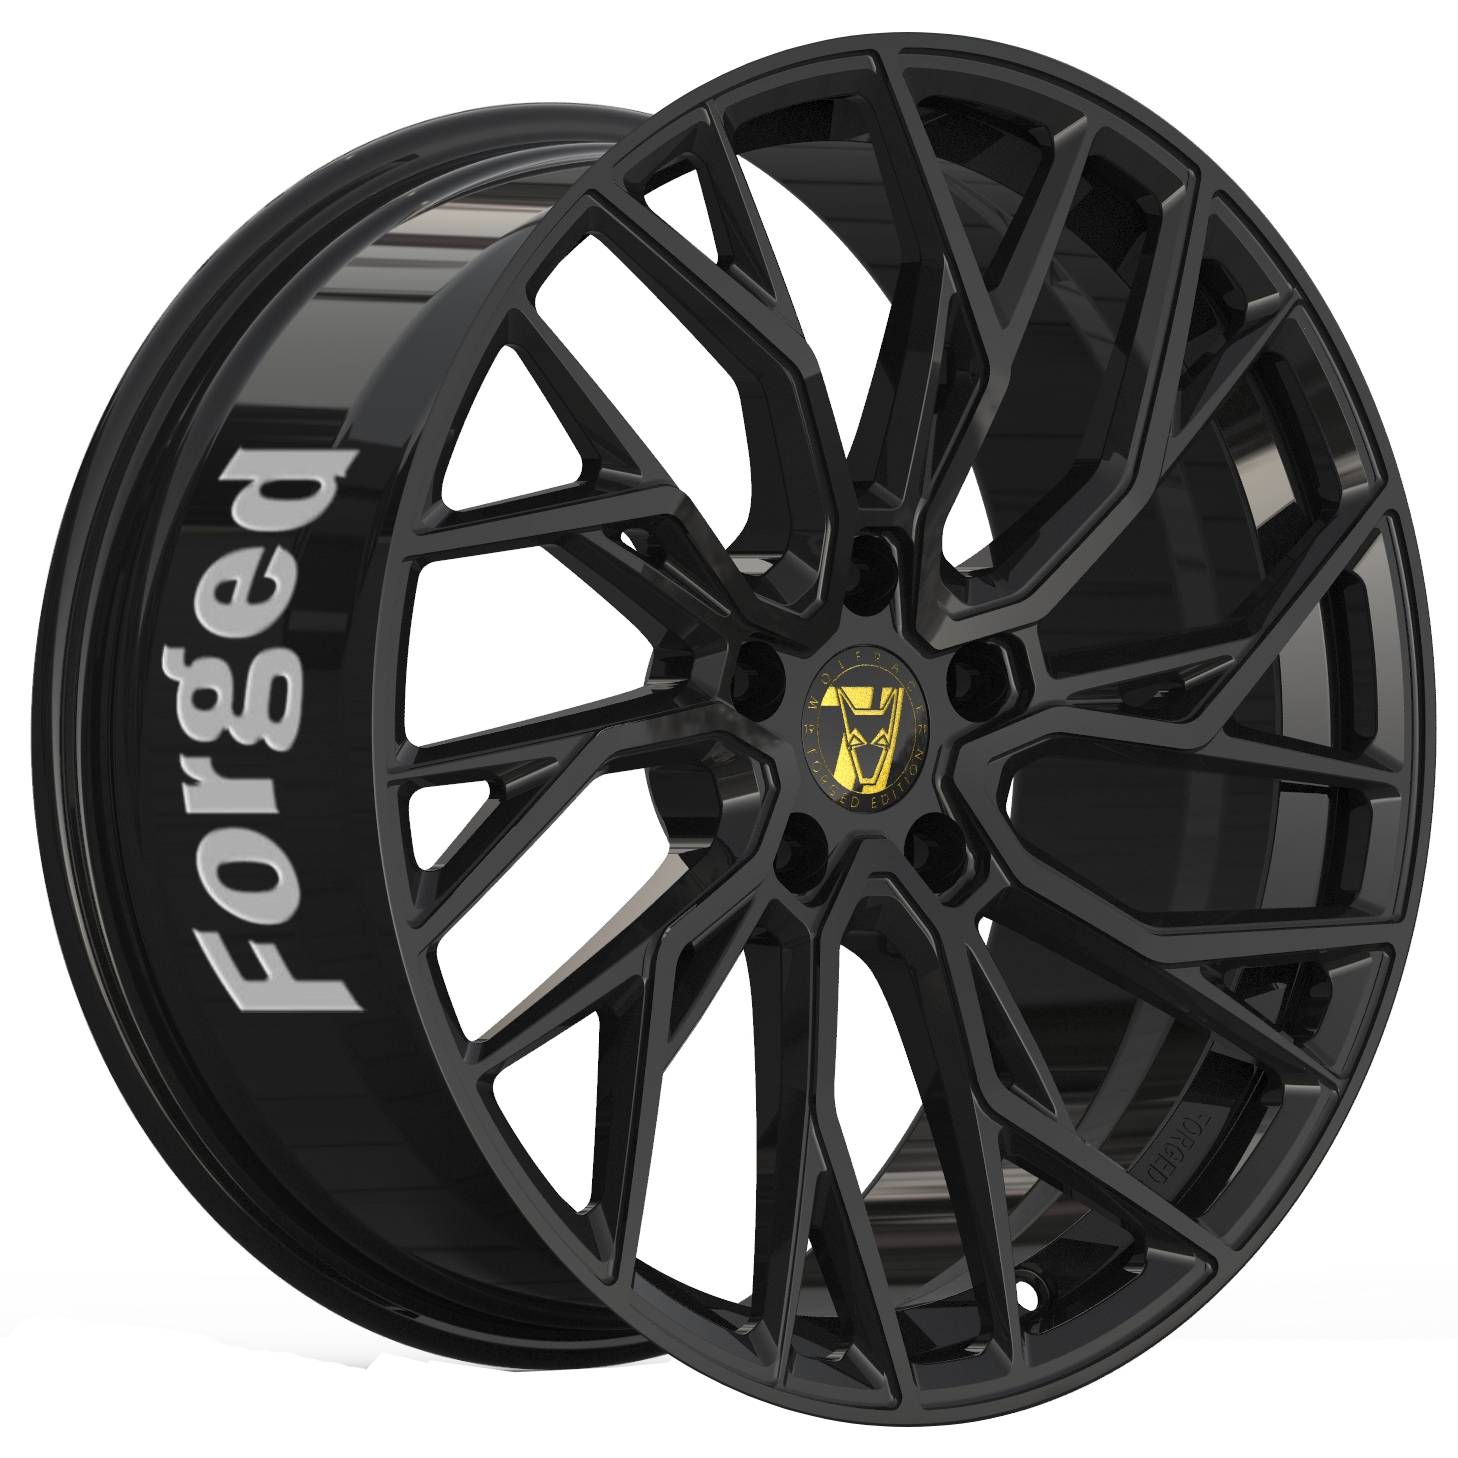 Demon Wheels 71 Forged Edition Voodoo Forged [10x23] -5x114.3- ET 35